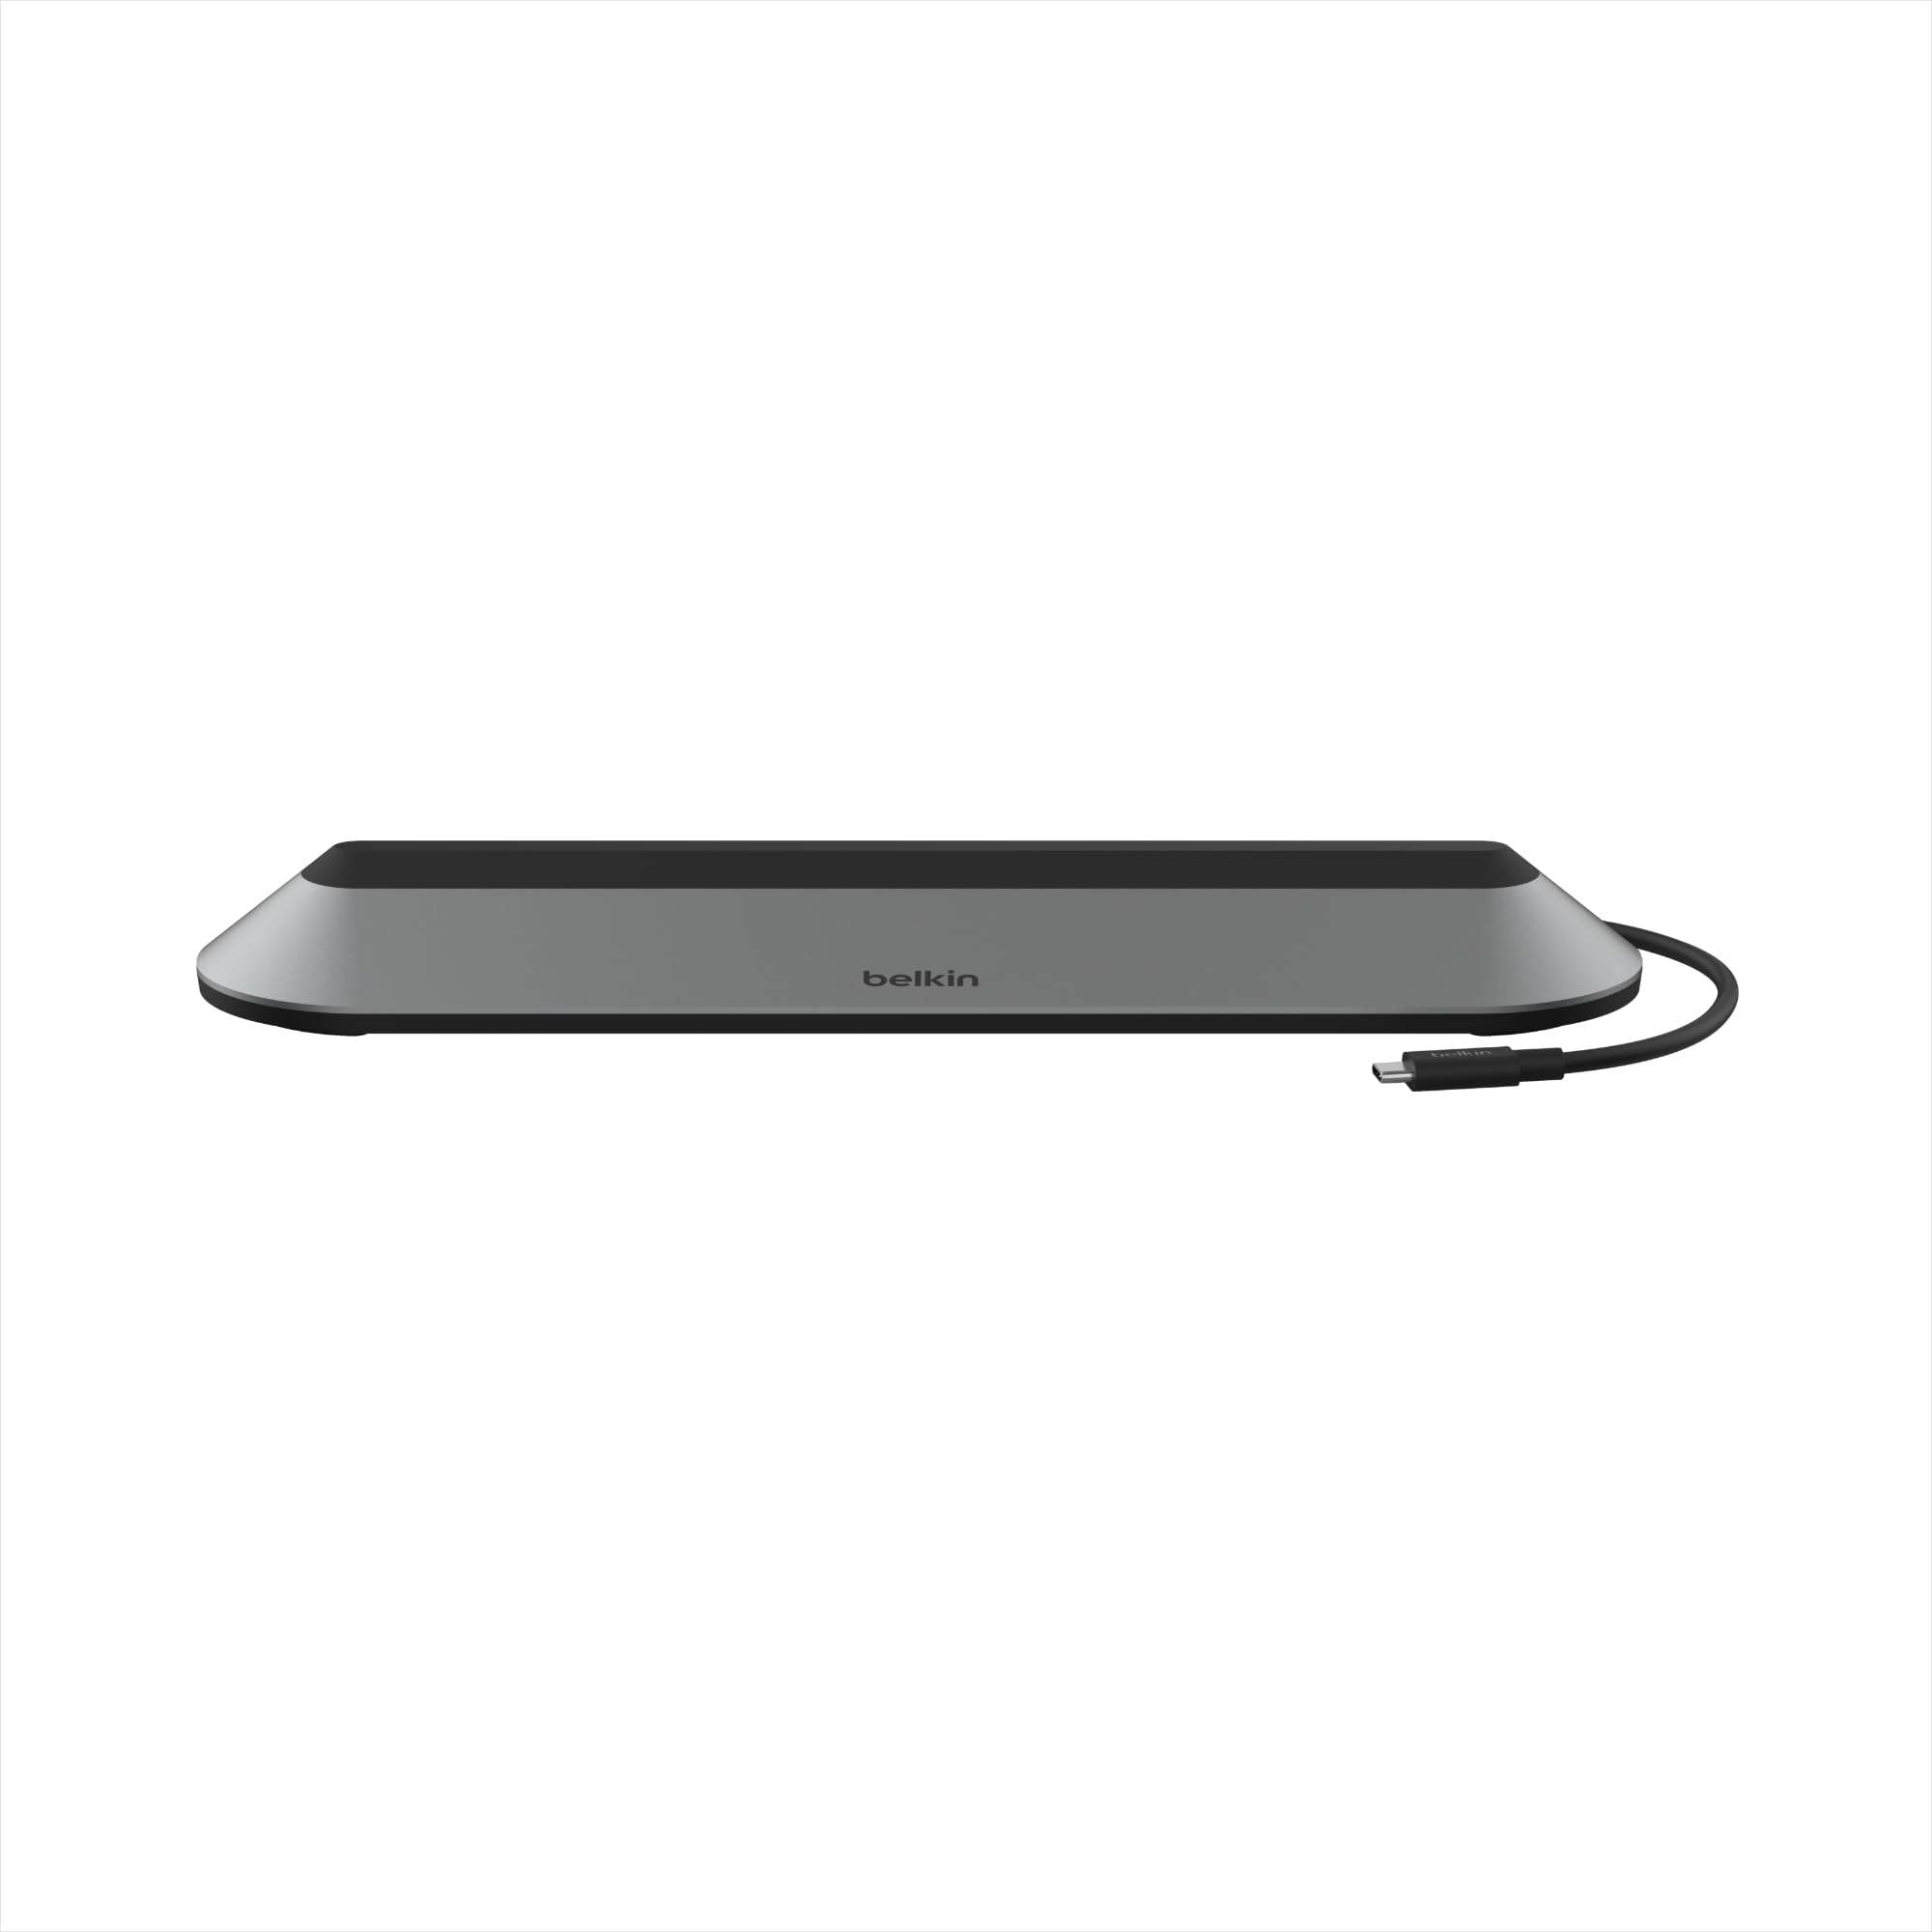 Belkin Connect 11-in-1 Universal USB-C Pro Dock w/ 3-Monitor Support, Silicon Motion Technology - Works with Mac, Windows, and Chromebook - 100W PD w/ 10Gbps Transfer Speeds & 2.5Gbps Ethernet - Grey